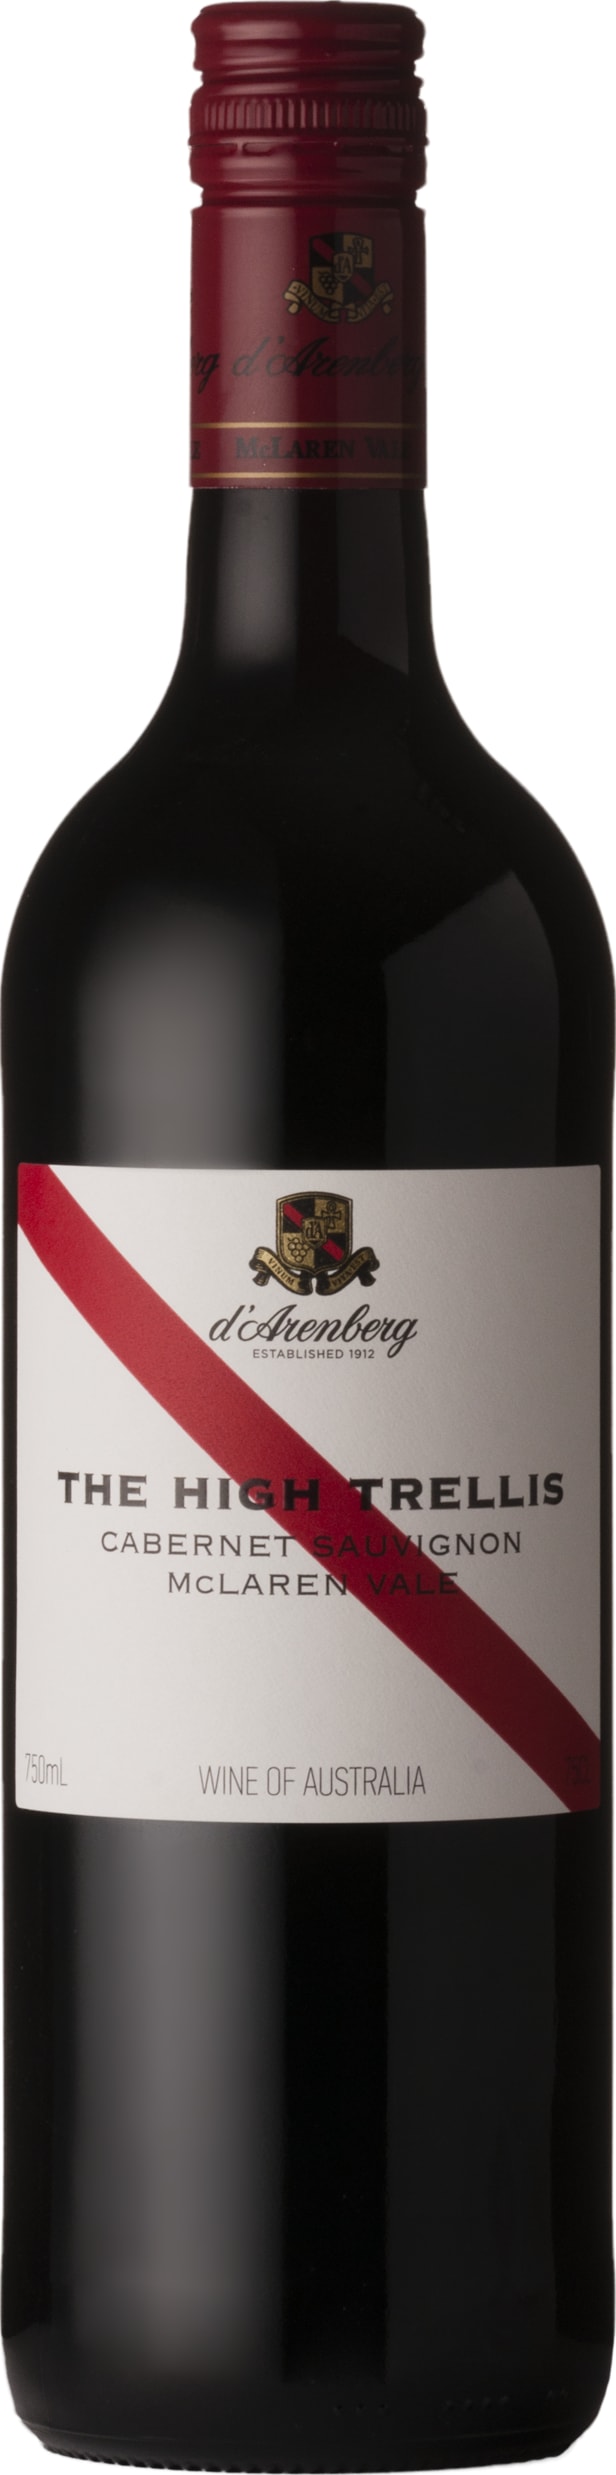 D Arenberg The High Trellis Cabernet Sauvignon 2020 75cl - Buy D Arenberg Wines from GREAT WINES DIRECT wine shop